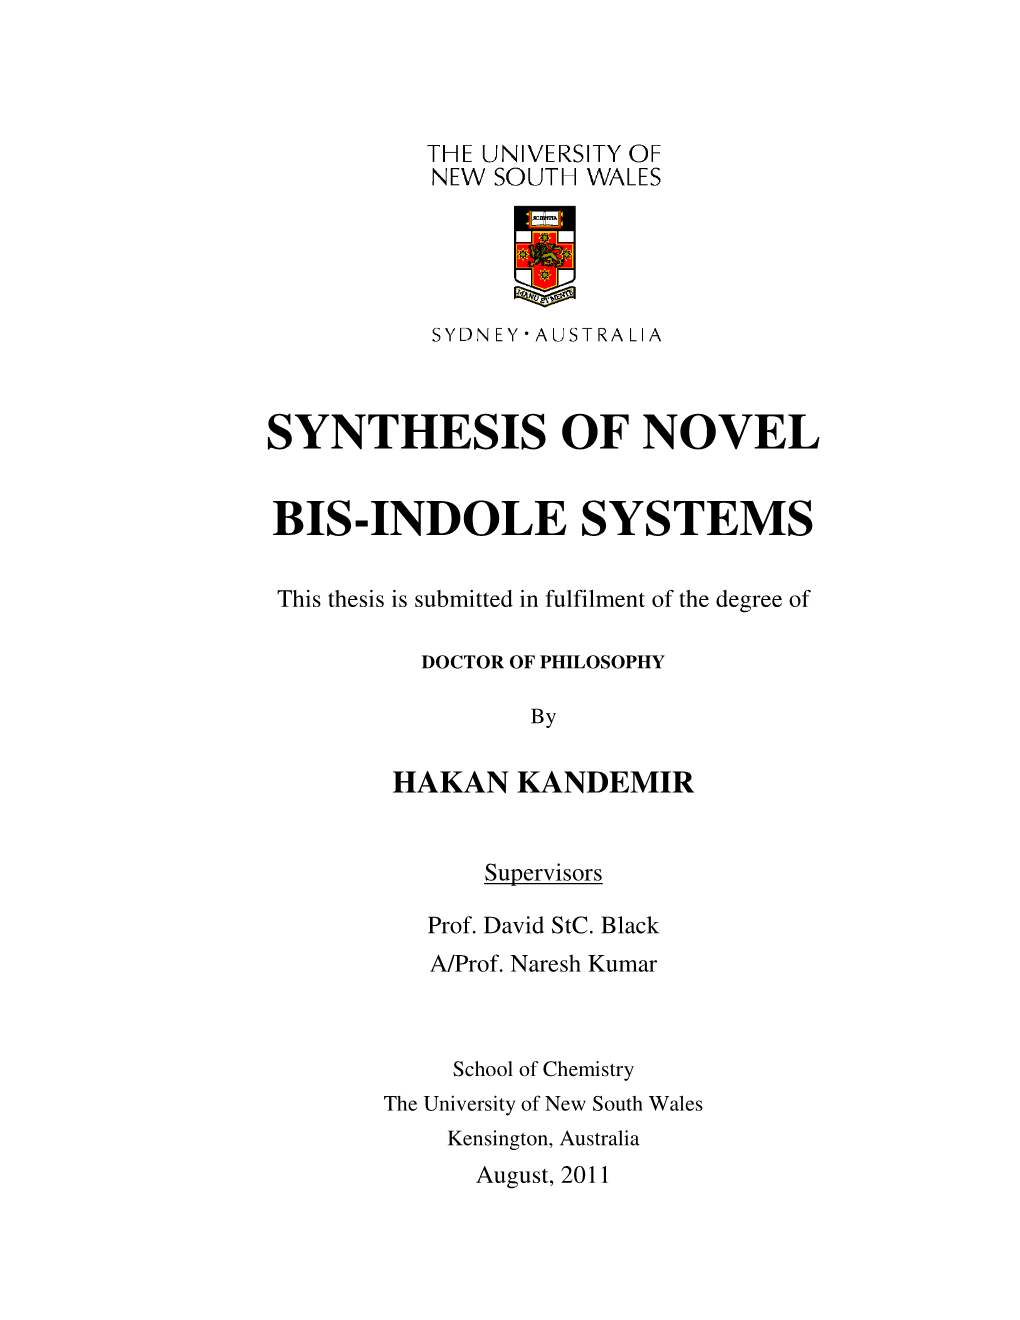 Synthesis of Novel Bis-Indole Systems